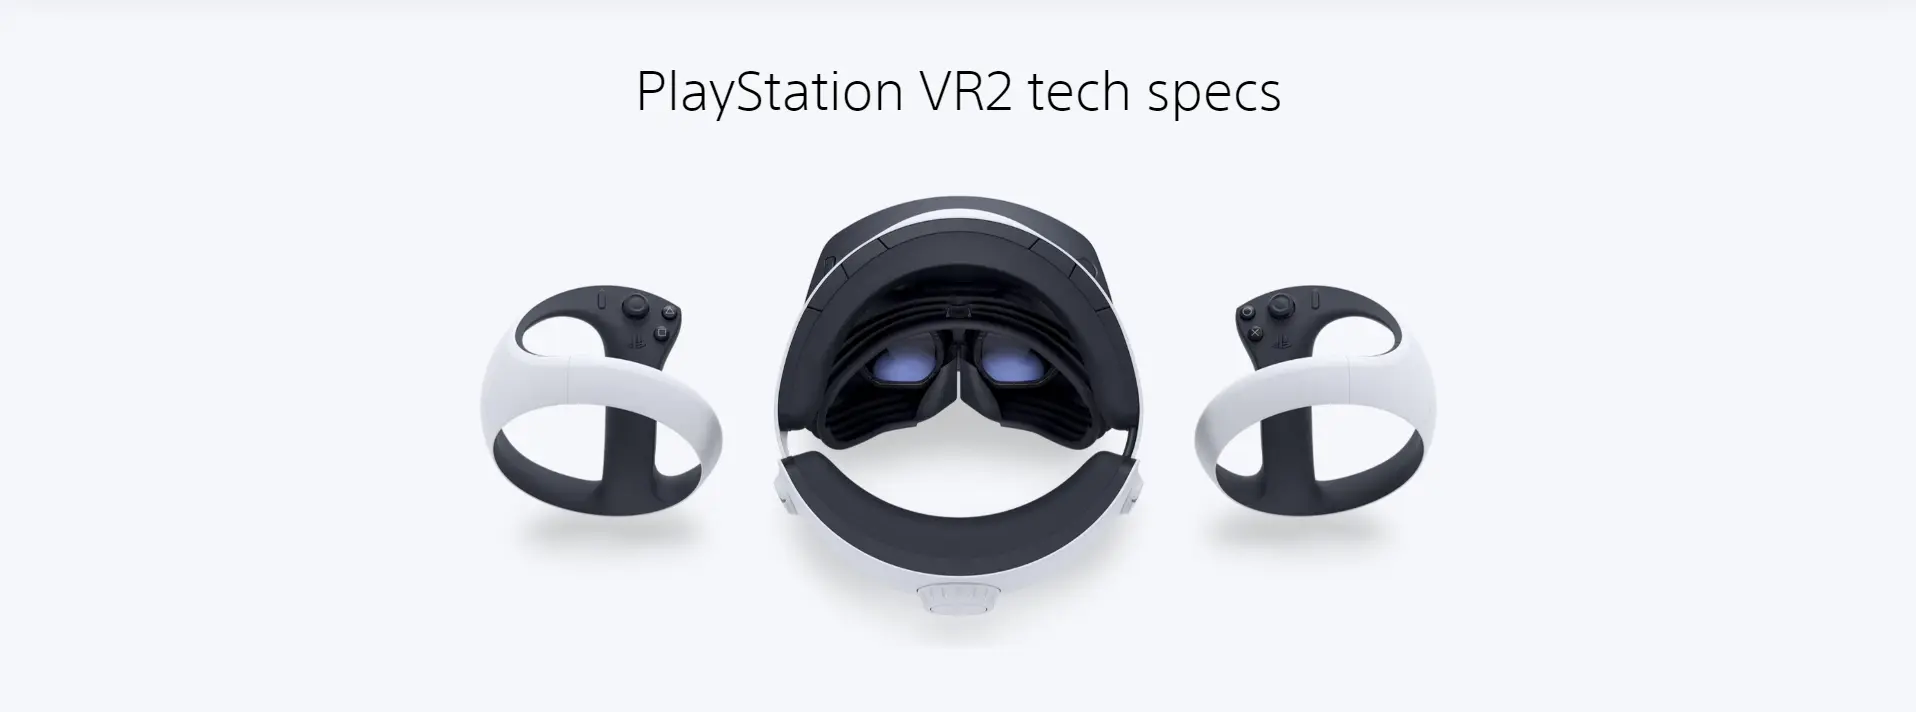 PS VR2 Tech Specs PlayStation VR2 display setup and compatibility India